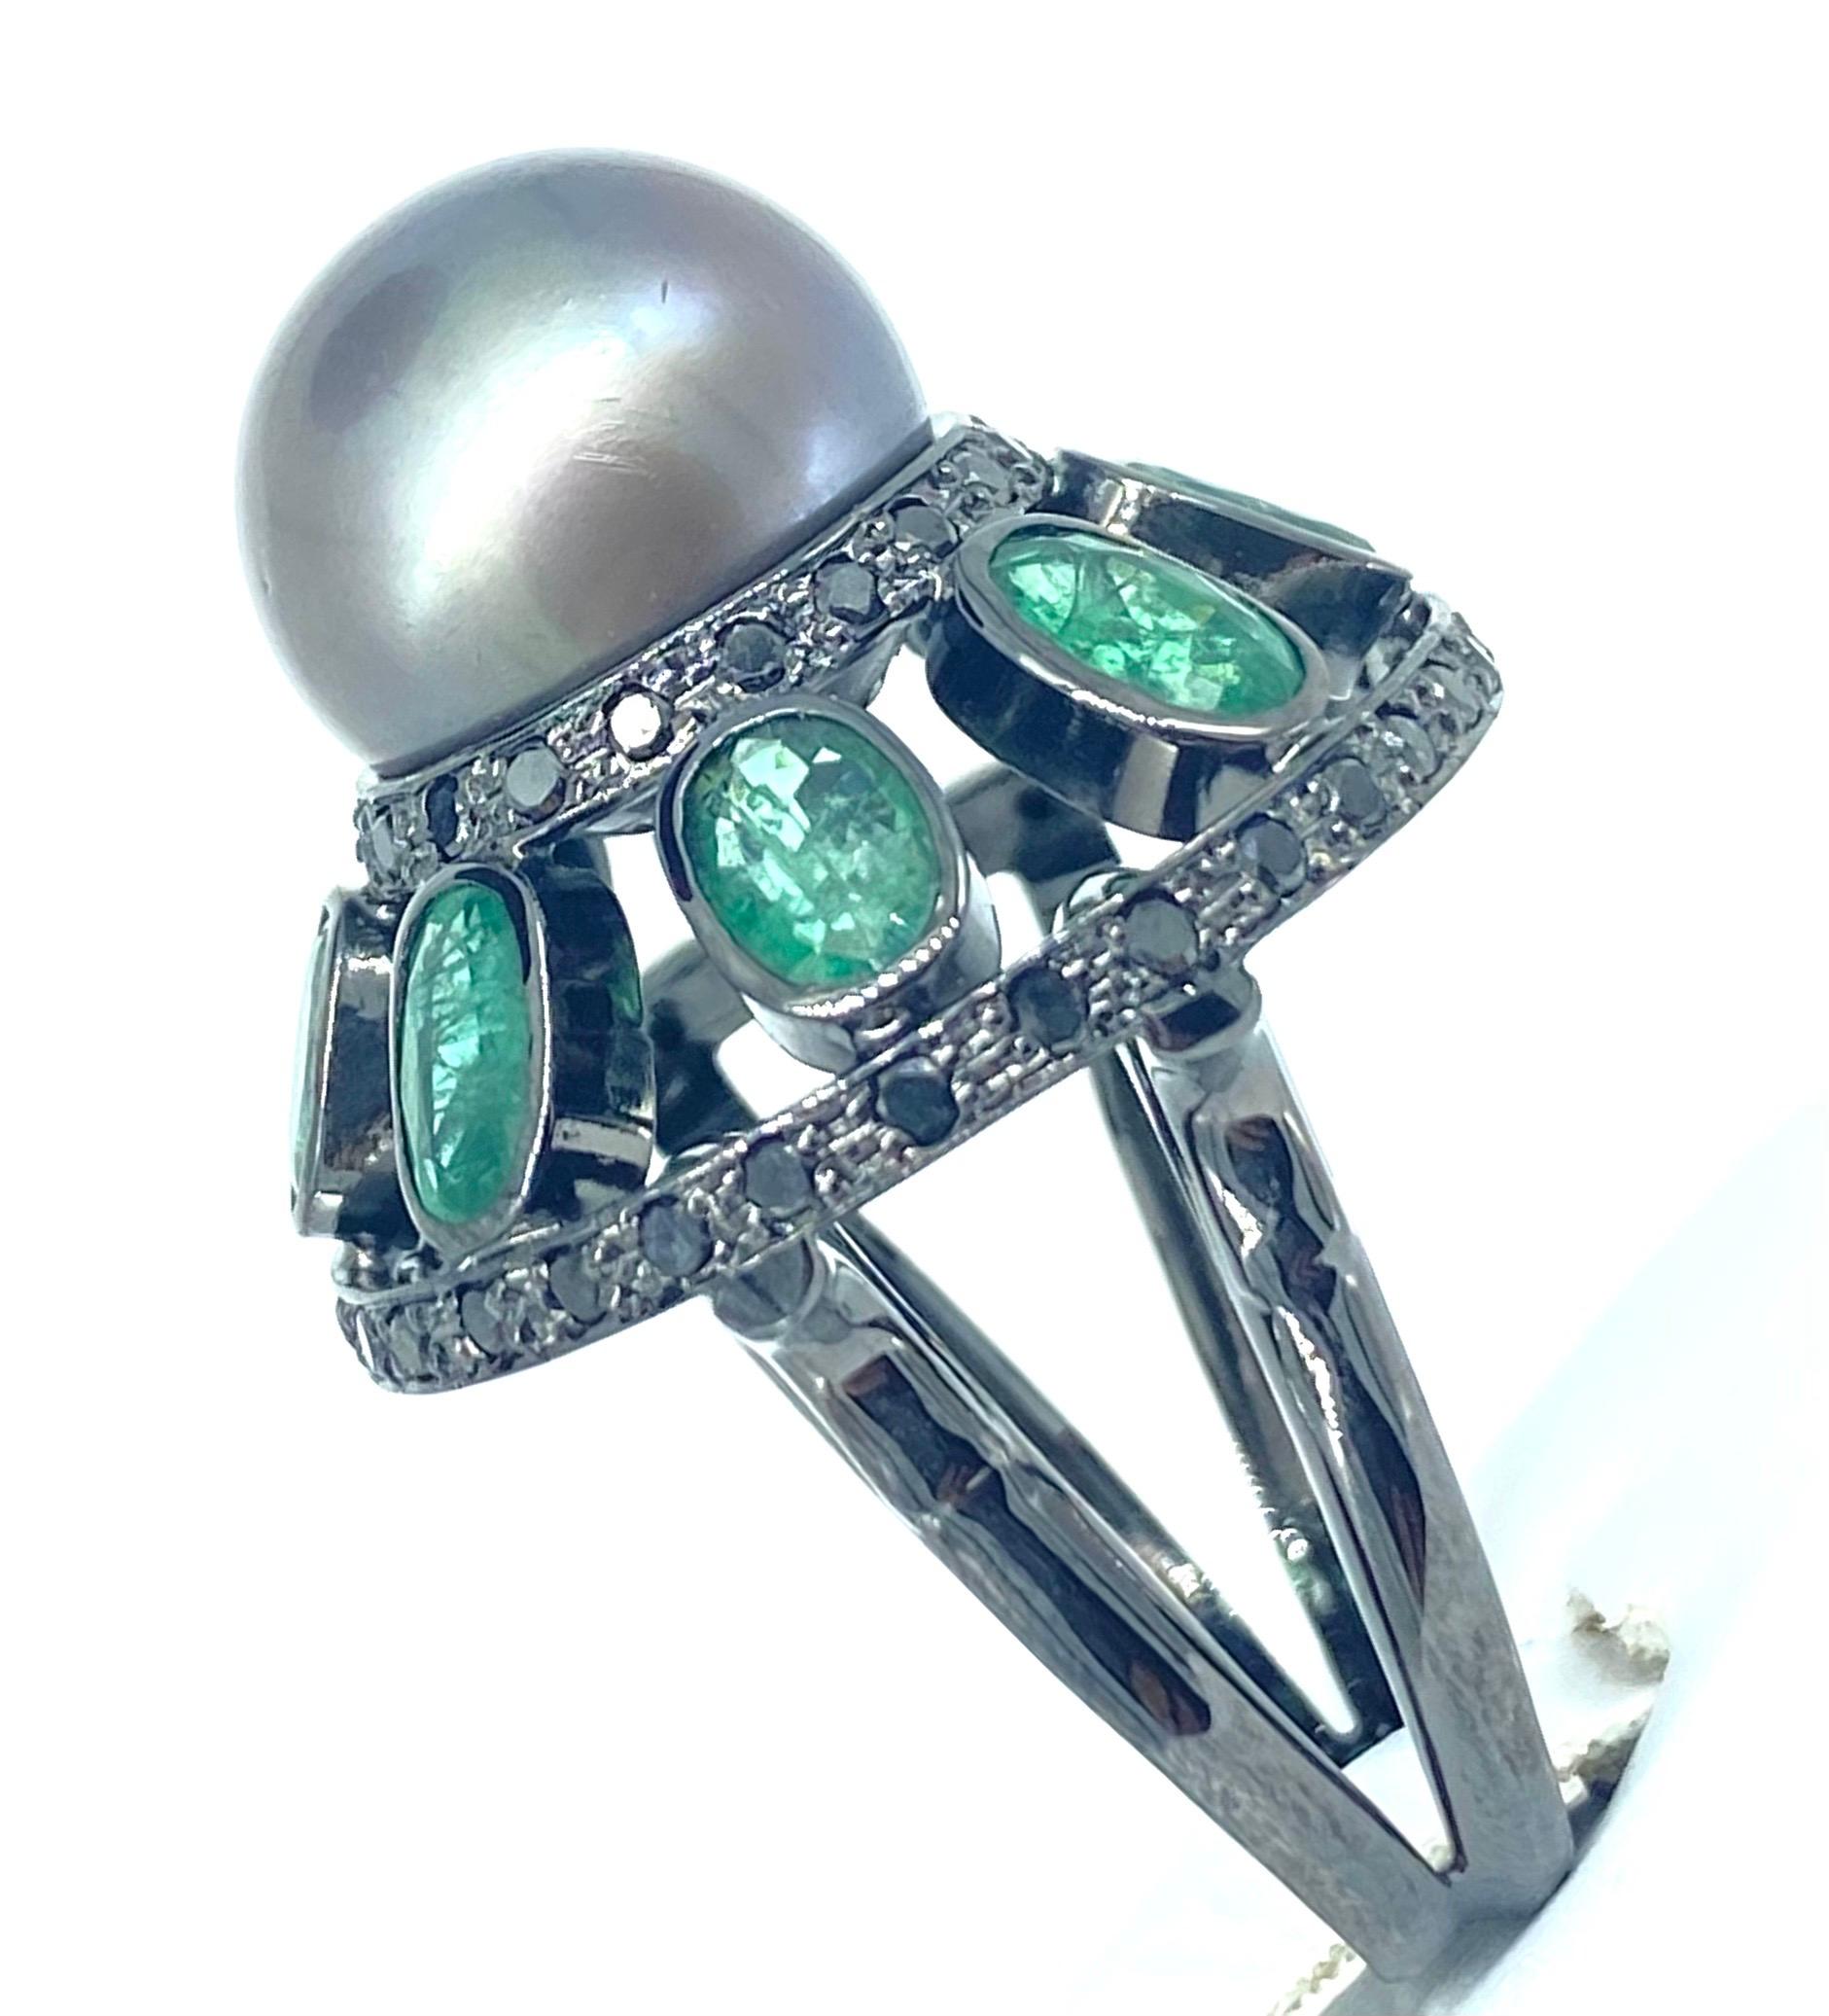 Designer 12.5mm Pearl, Black Diamonds & Green Emeralds Ballerina Black Gold Ring
This ring is a unique and wearable Piece of art.
The center south sea Pearl measures 12.5mm and surrounded by green oval cut emeralds at approx 6.50 carats and black